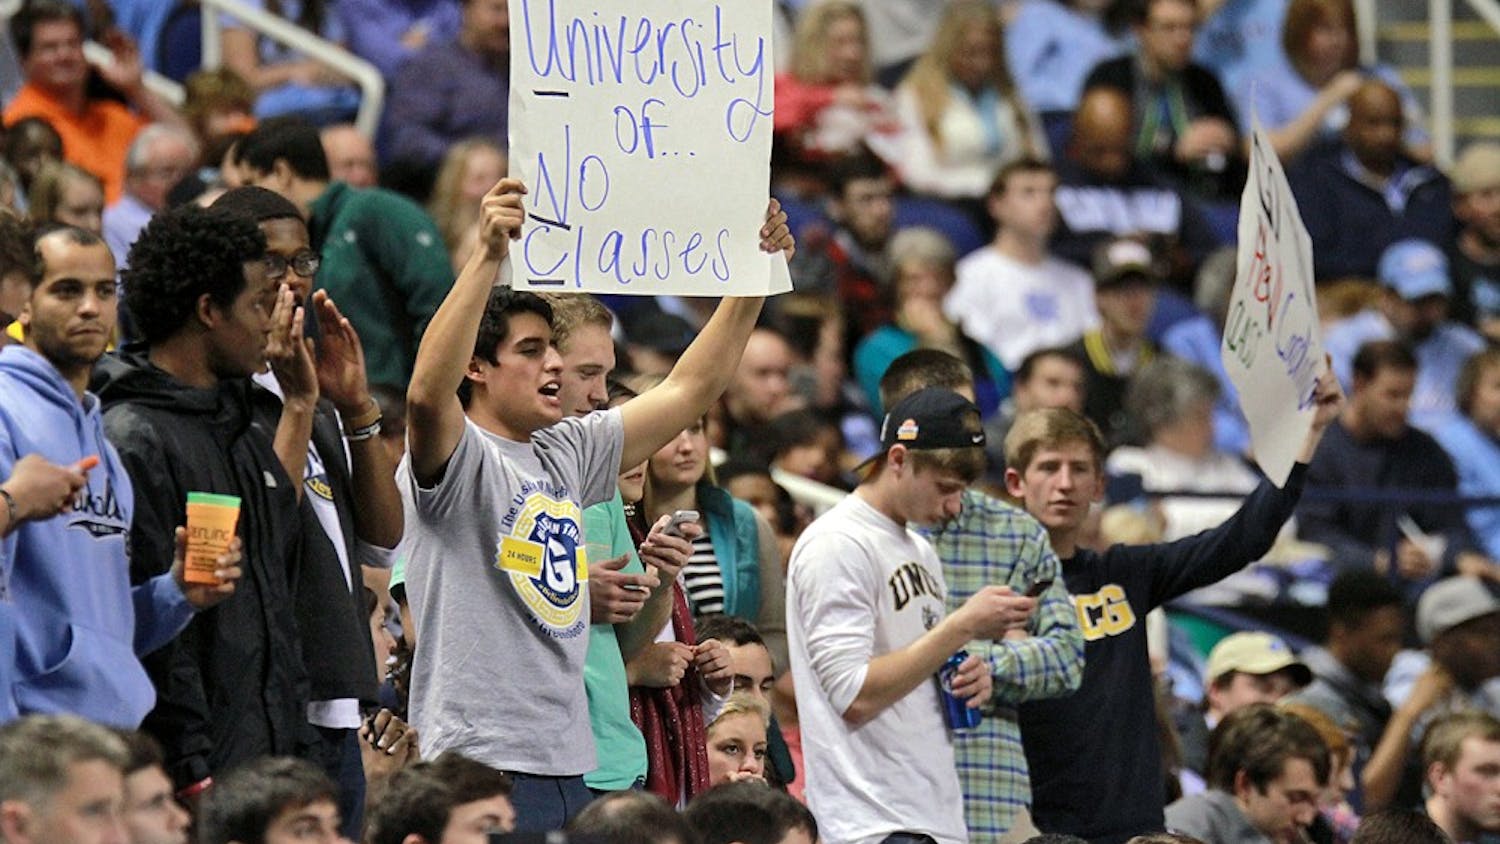 UNC-Greensboro fans held signs mocking UNC's athletic-academic scandal.